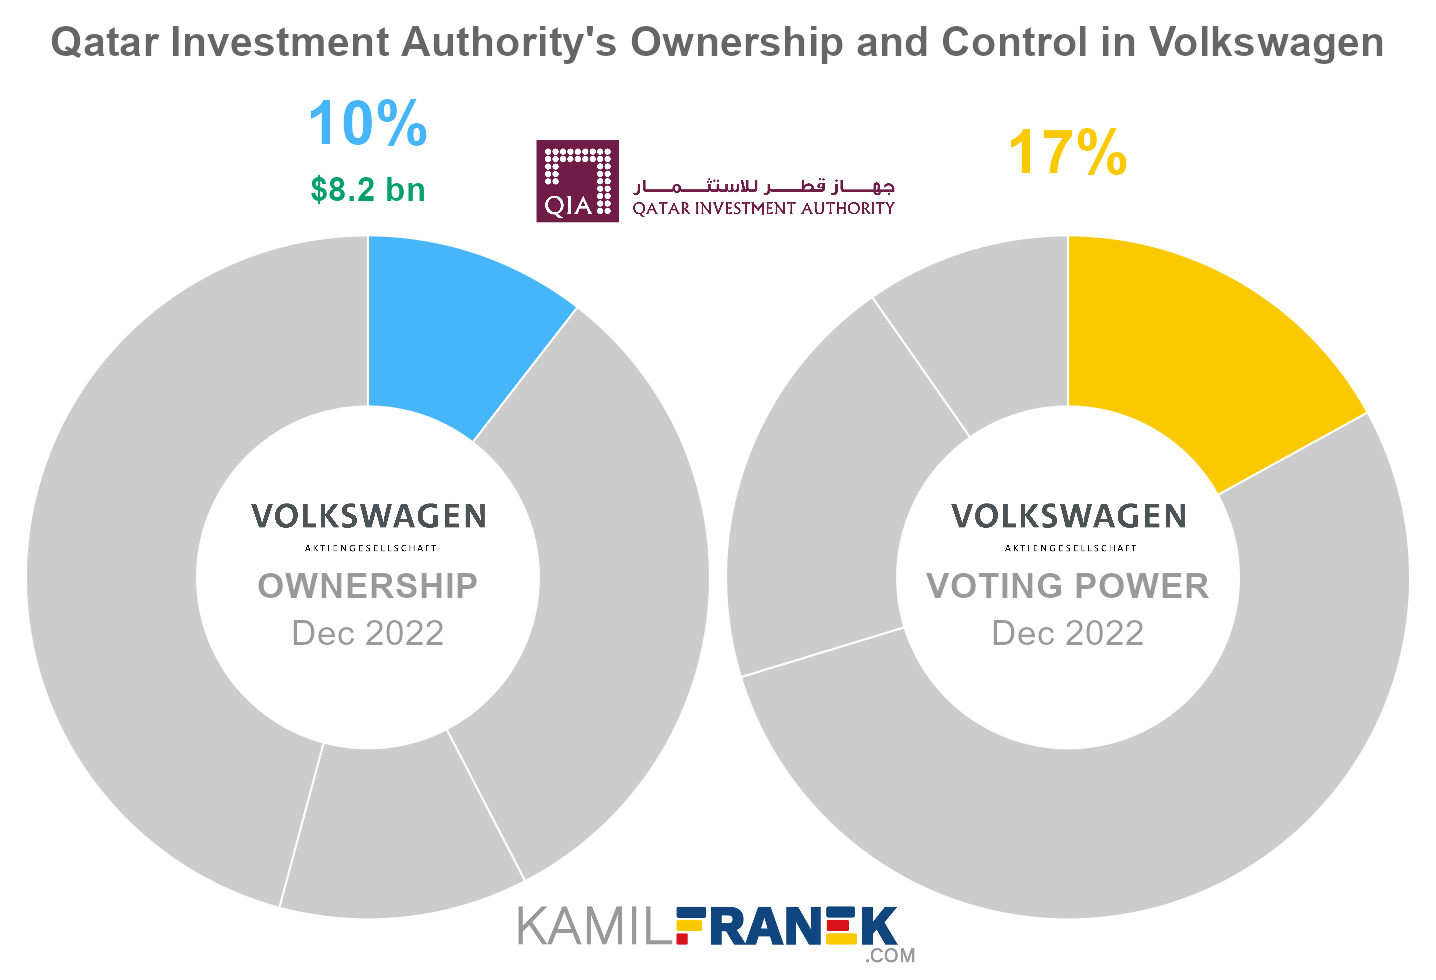 Qatar Investment Authority's share ownership and voting power in Volkswagen (chart)